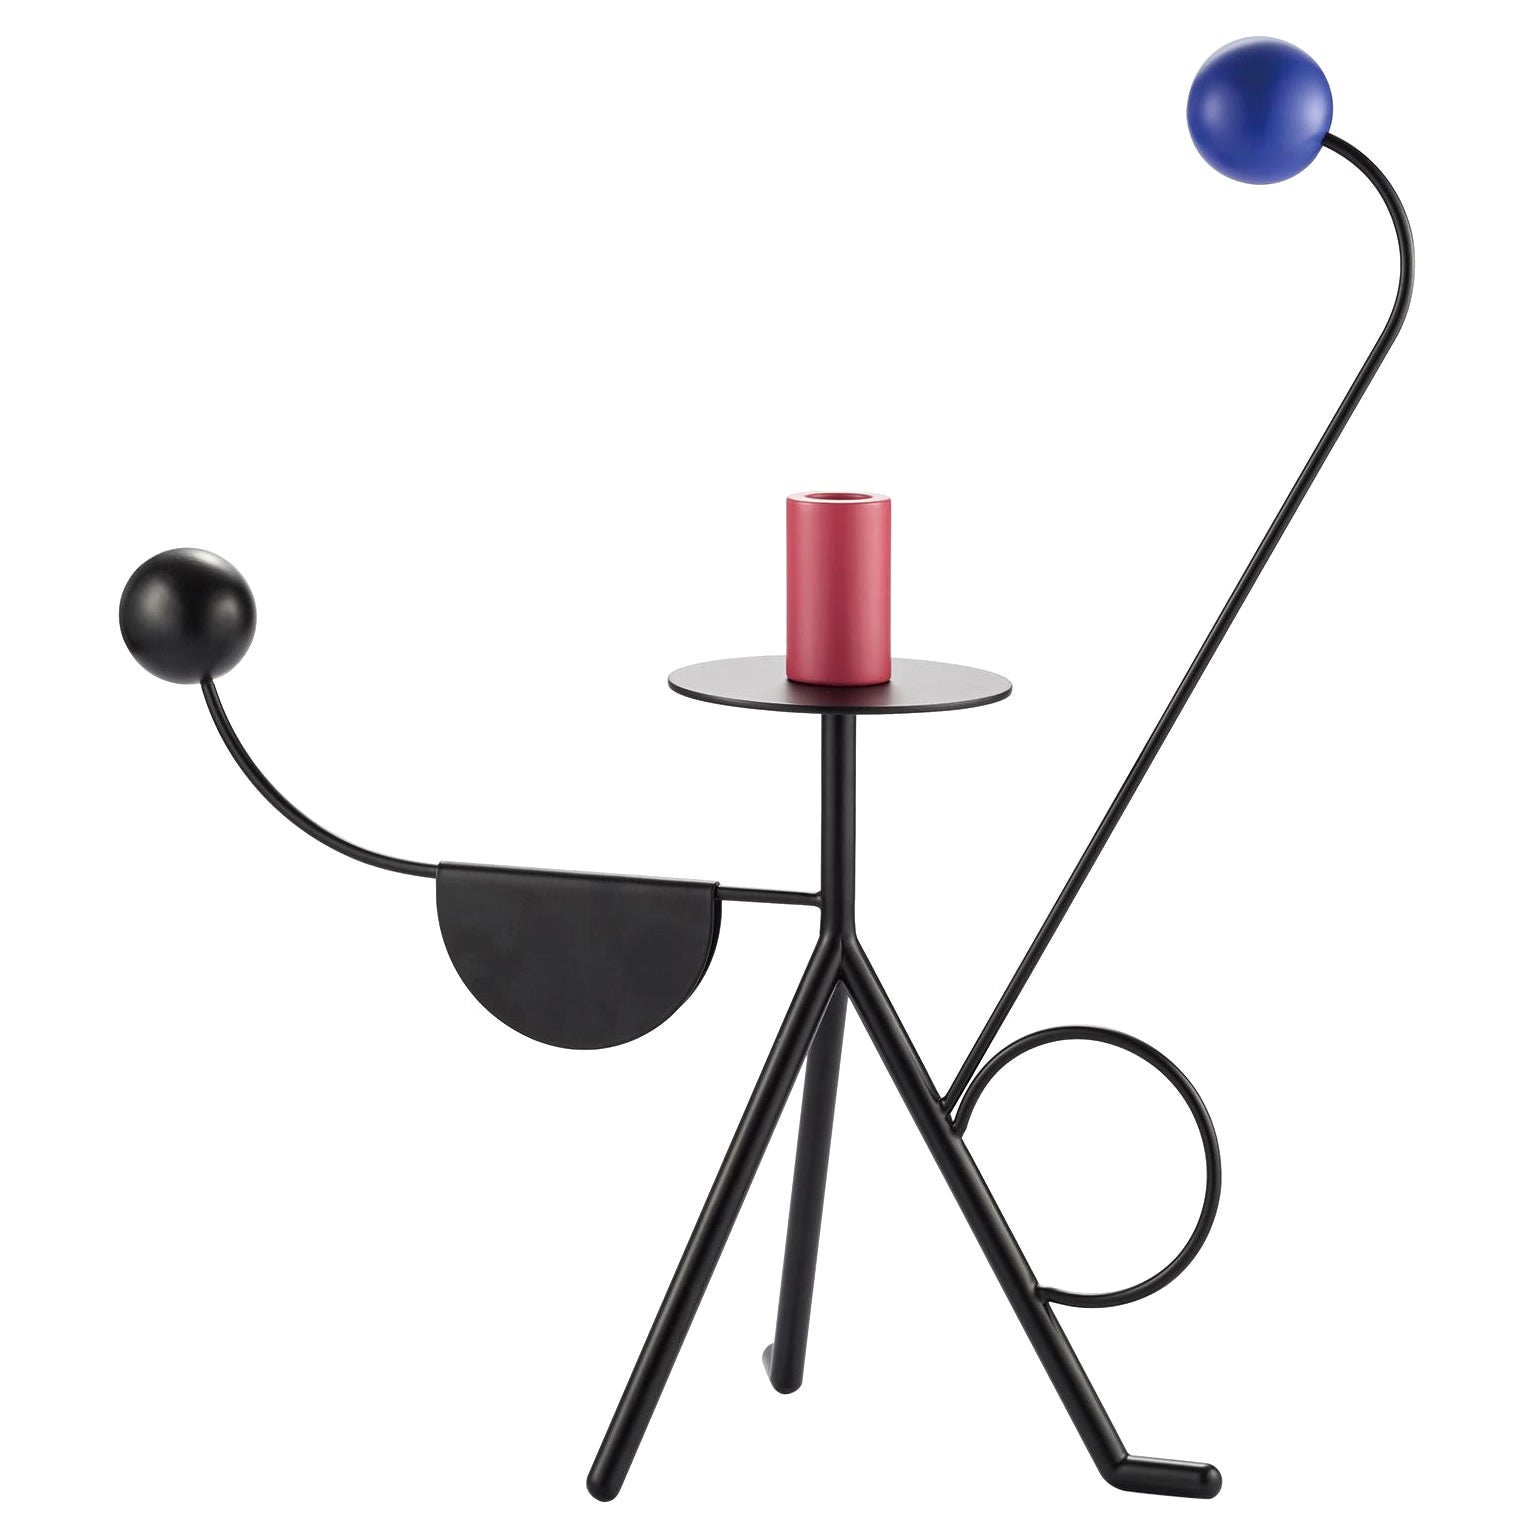 Les Immobiles N°3 Candleholder by Thomas Dariel For Sale